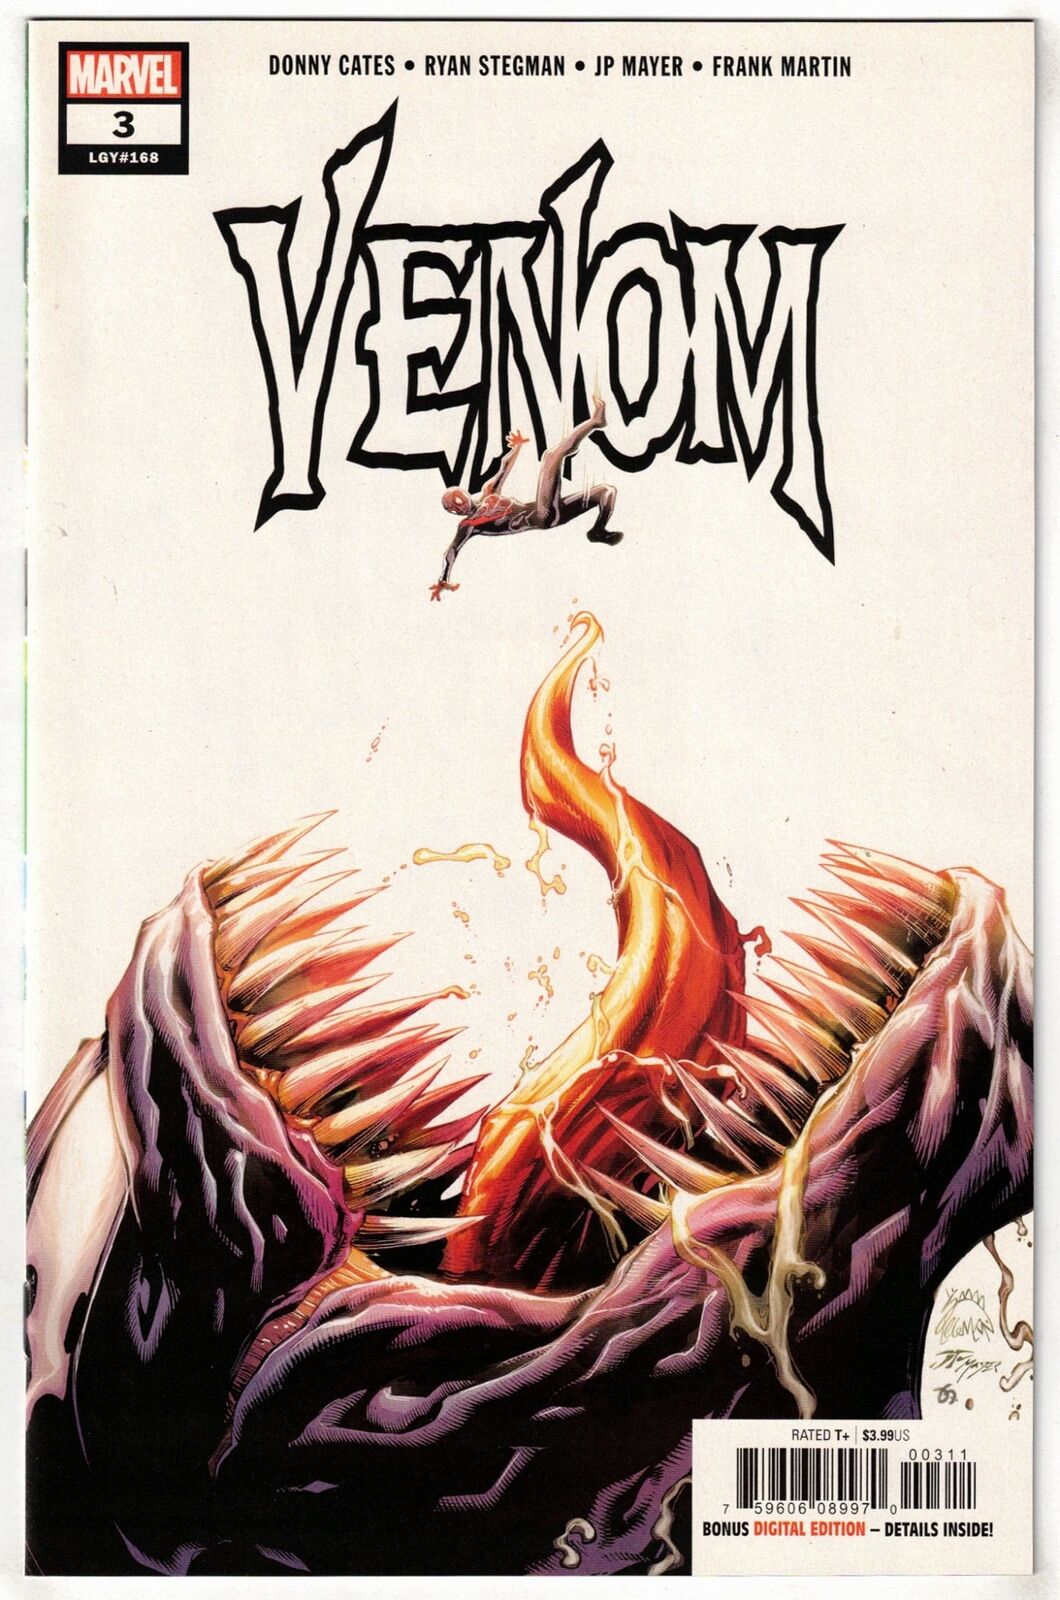 VENOM #3 (2018)- 1ST APPEARANCE OF KNULL- COVER A 1ST PRINT- DONNY CATES- VF+/NM